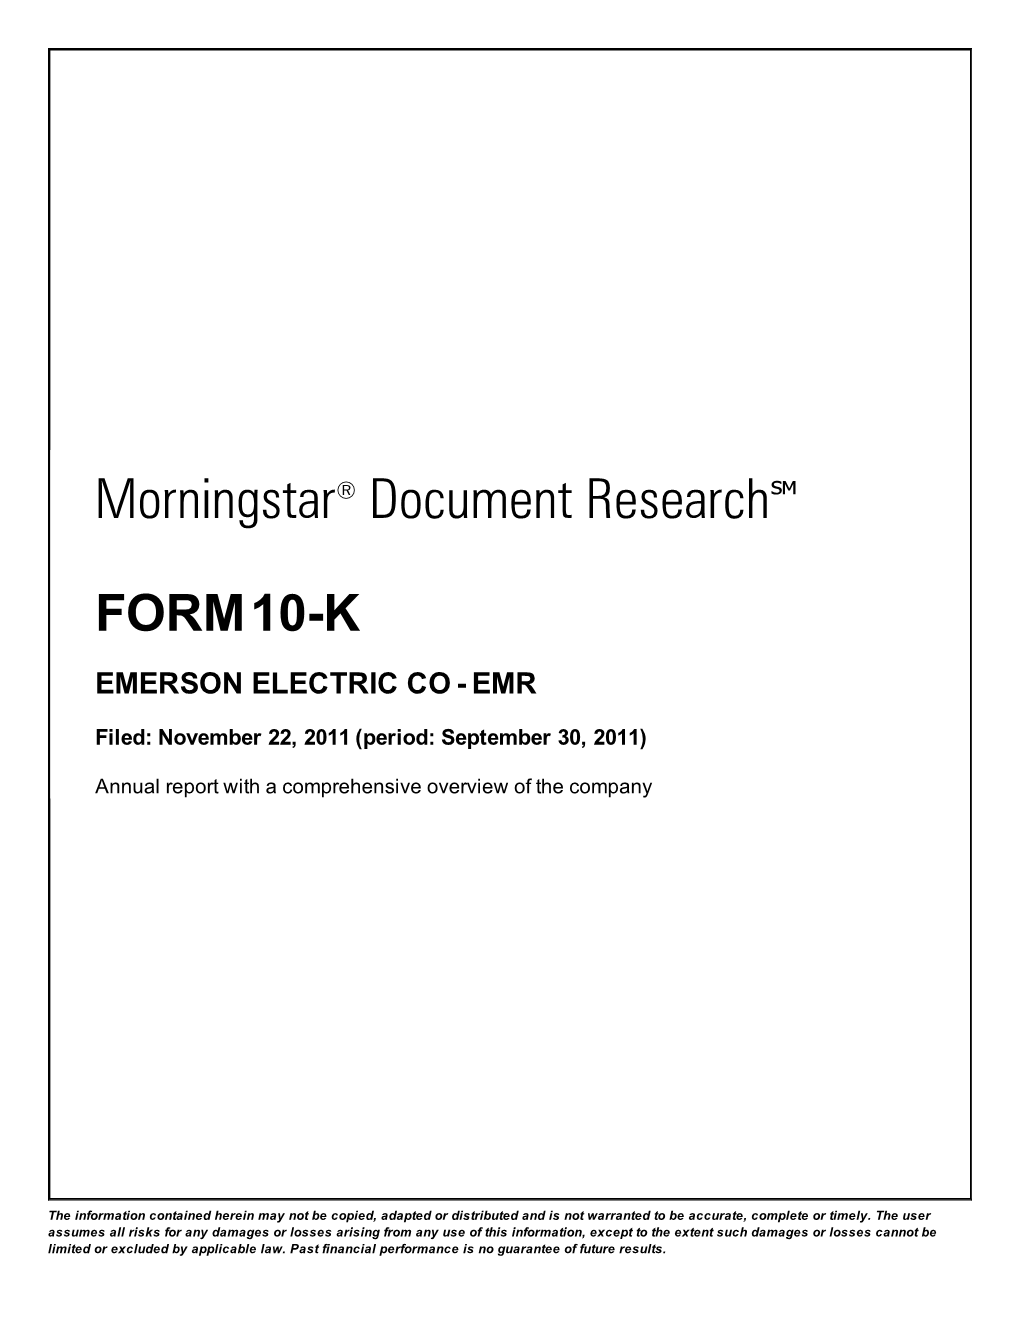 View Form 10-K